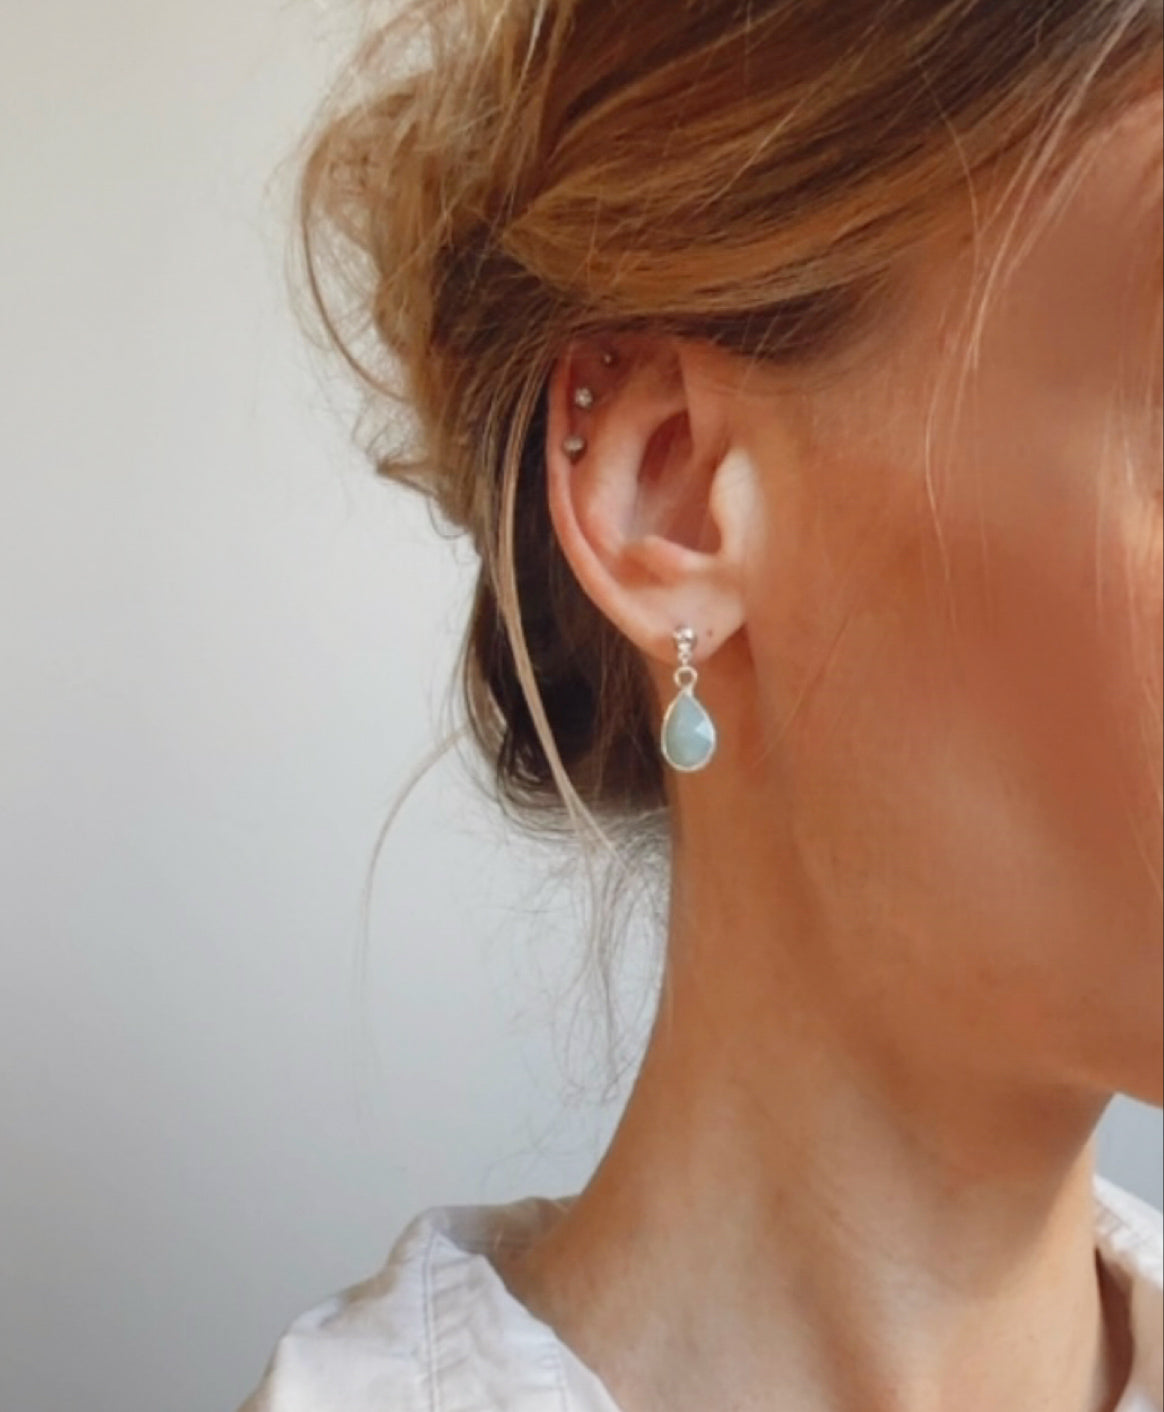 The Baya Earrings, crafted from exquisite sterling silver, showcase the timeless beauty of tear-drop-shaped Aquamarine gemstones. Aquamarine, with its serene blue hues reminiscent of the ocean, is used to inspire calmness and clarity.